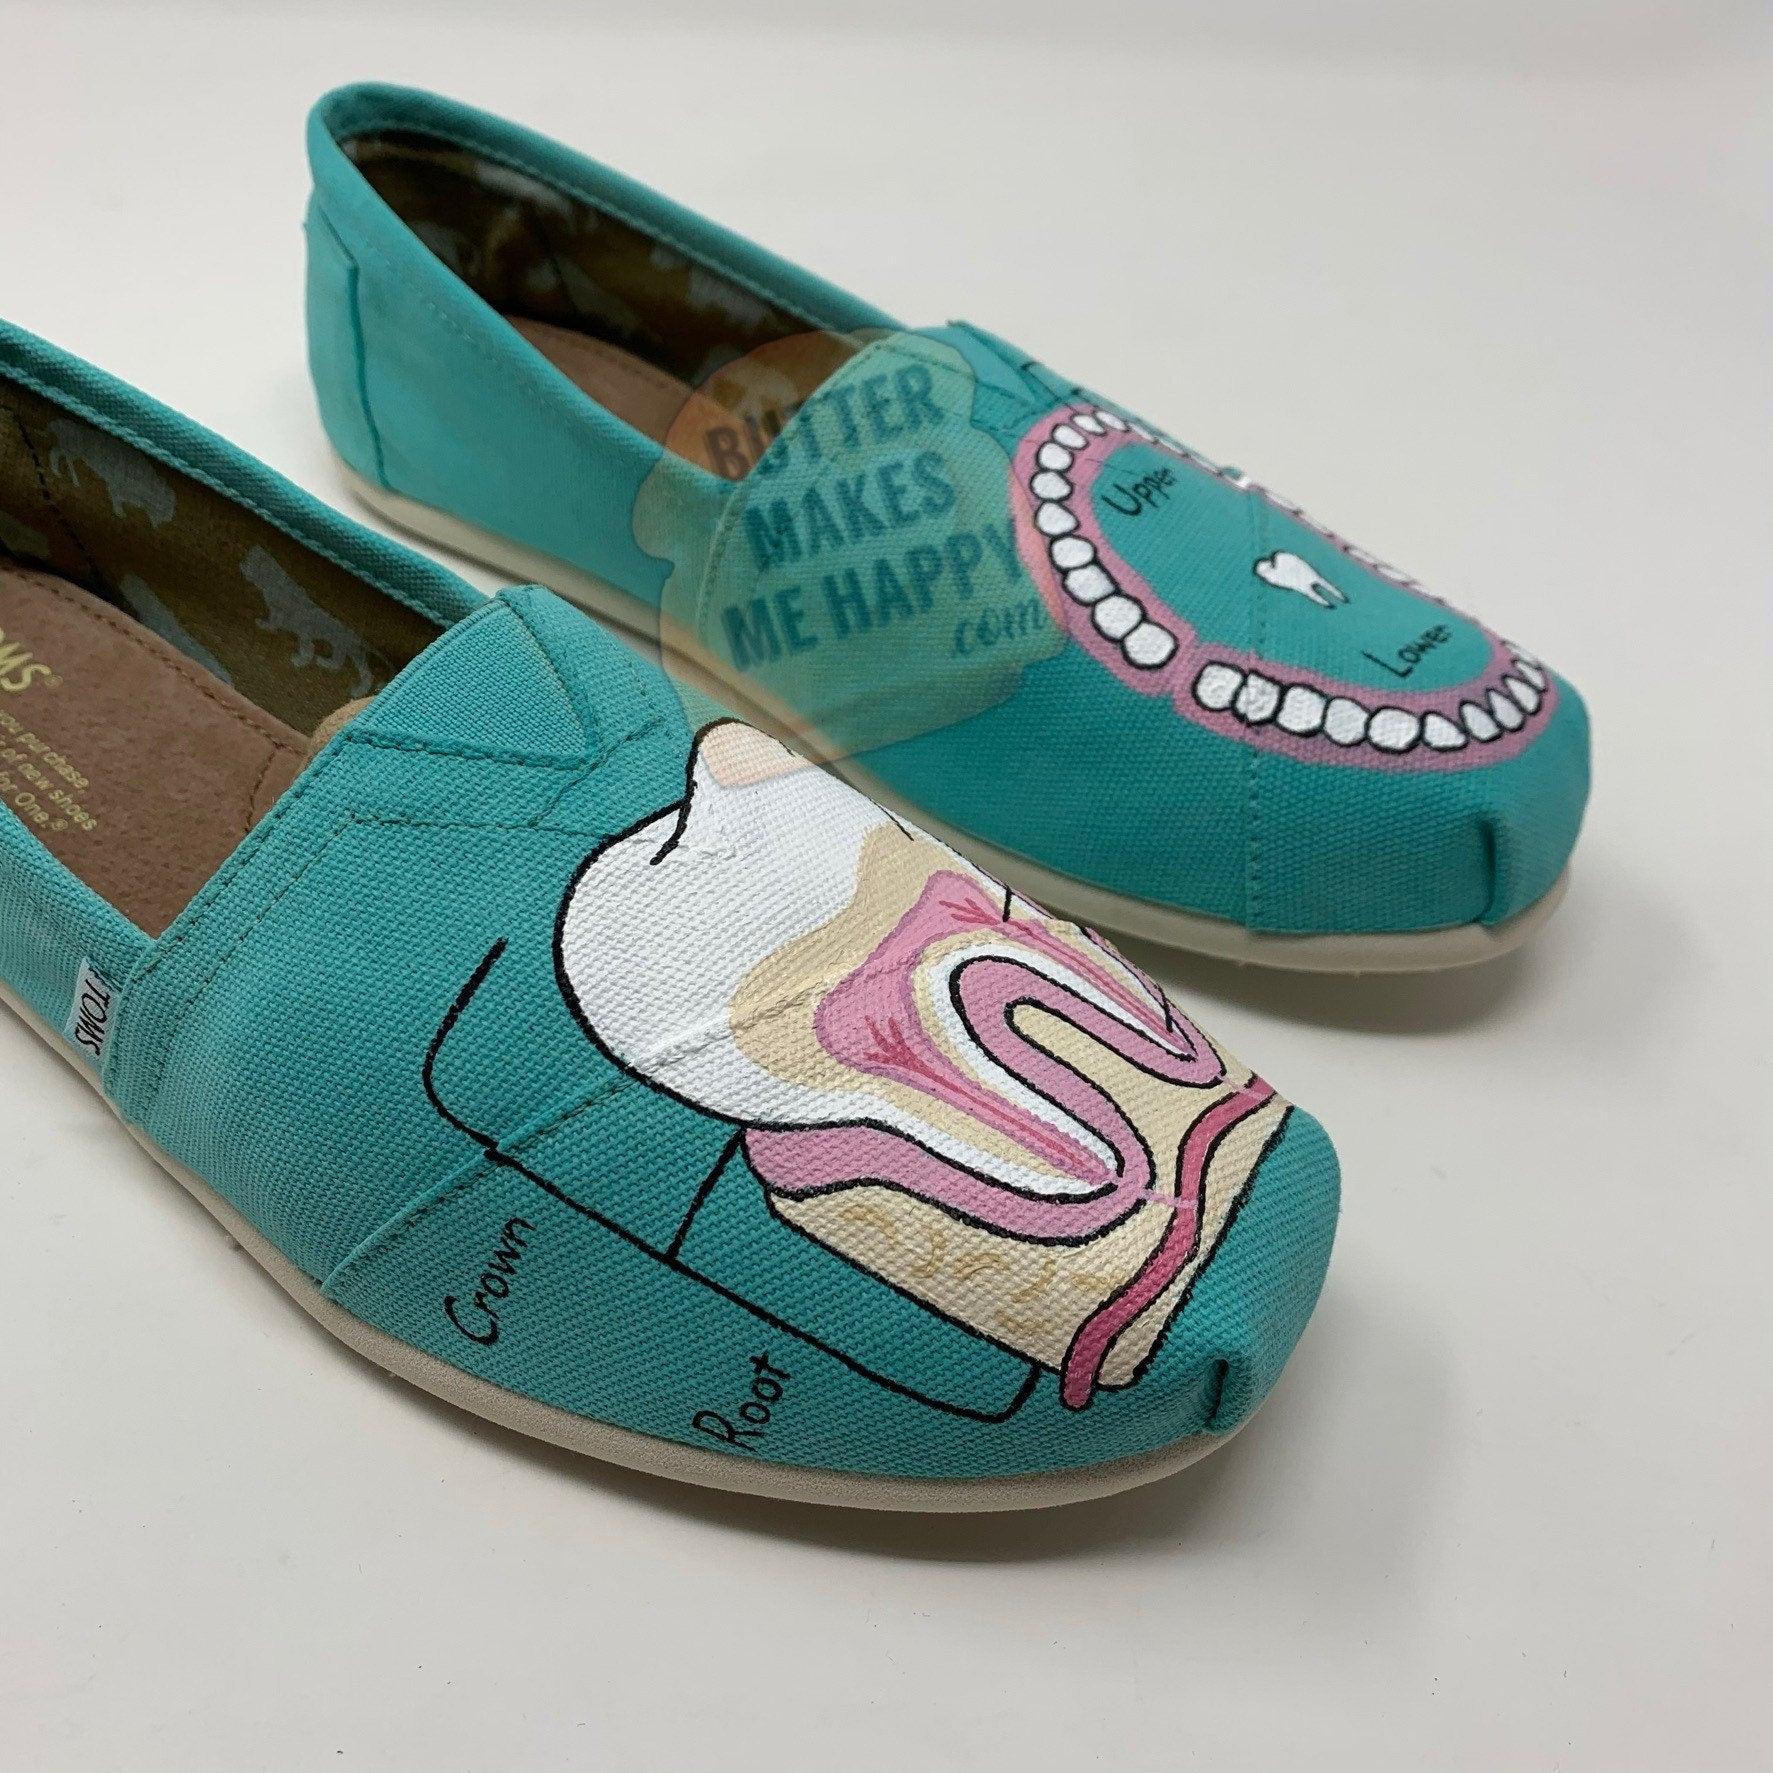 Dental Mouth Map Shoes